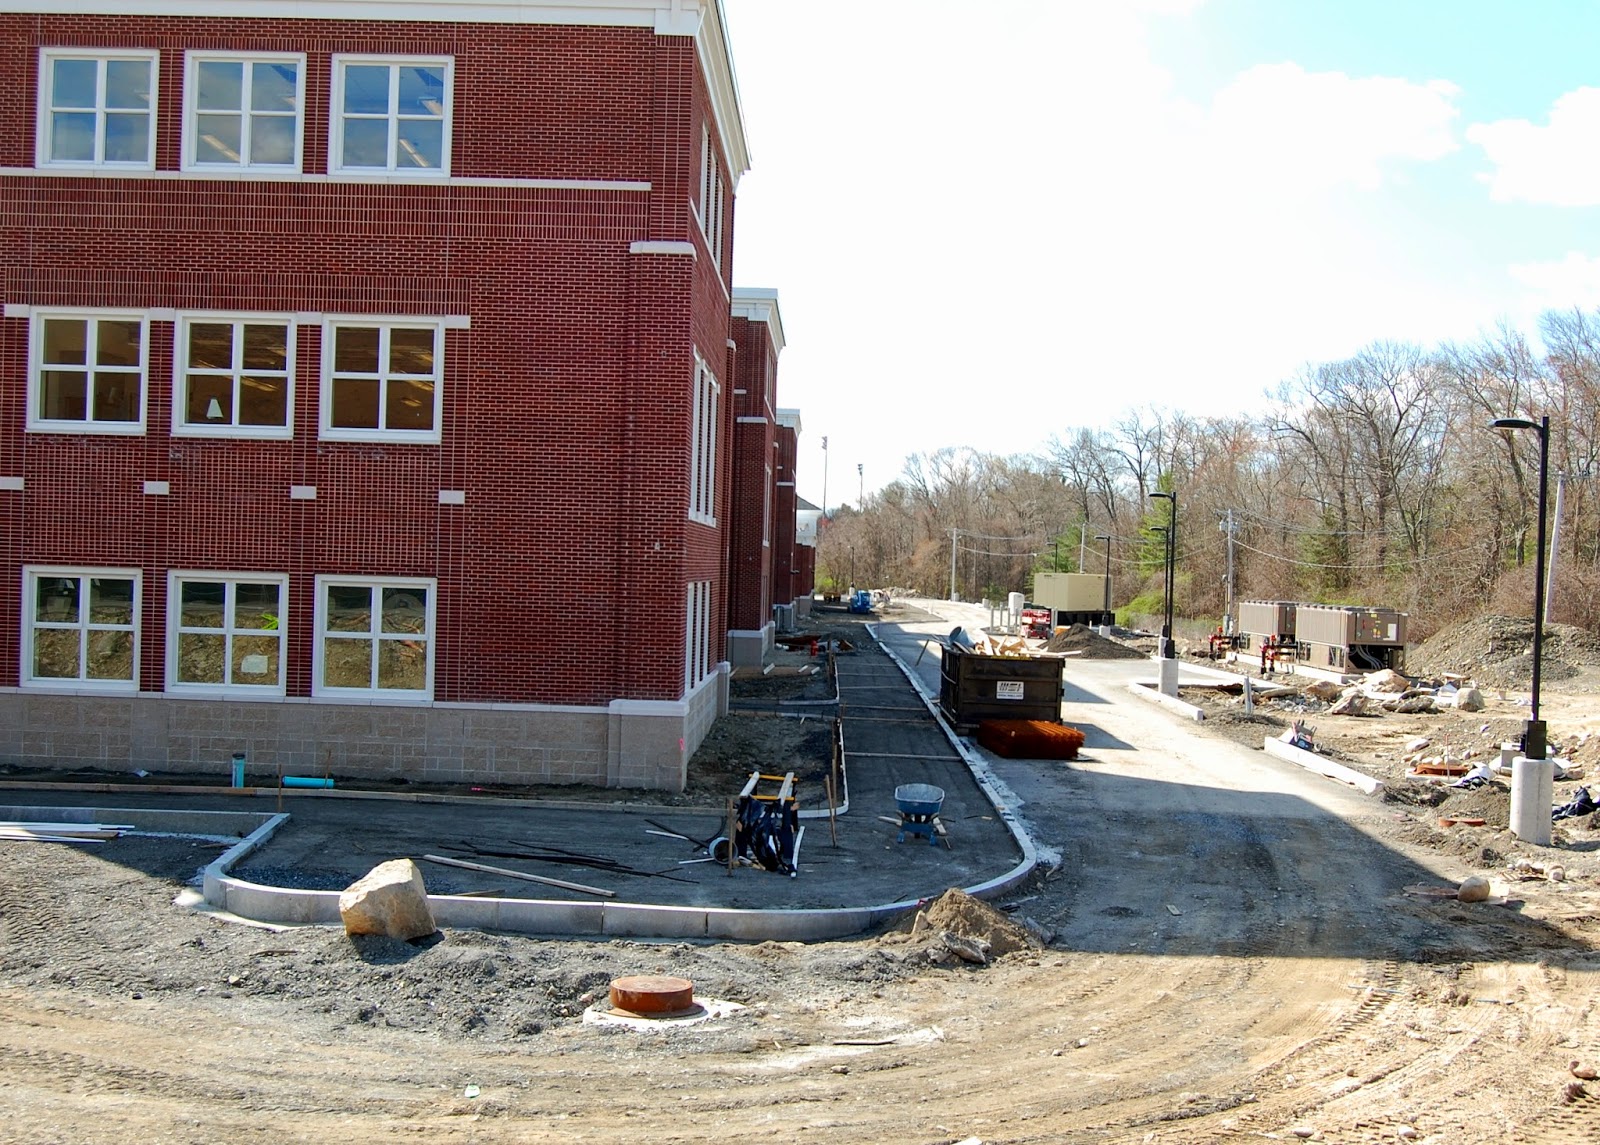 new FHS - sidewalks and landscaping in rear